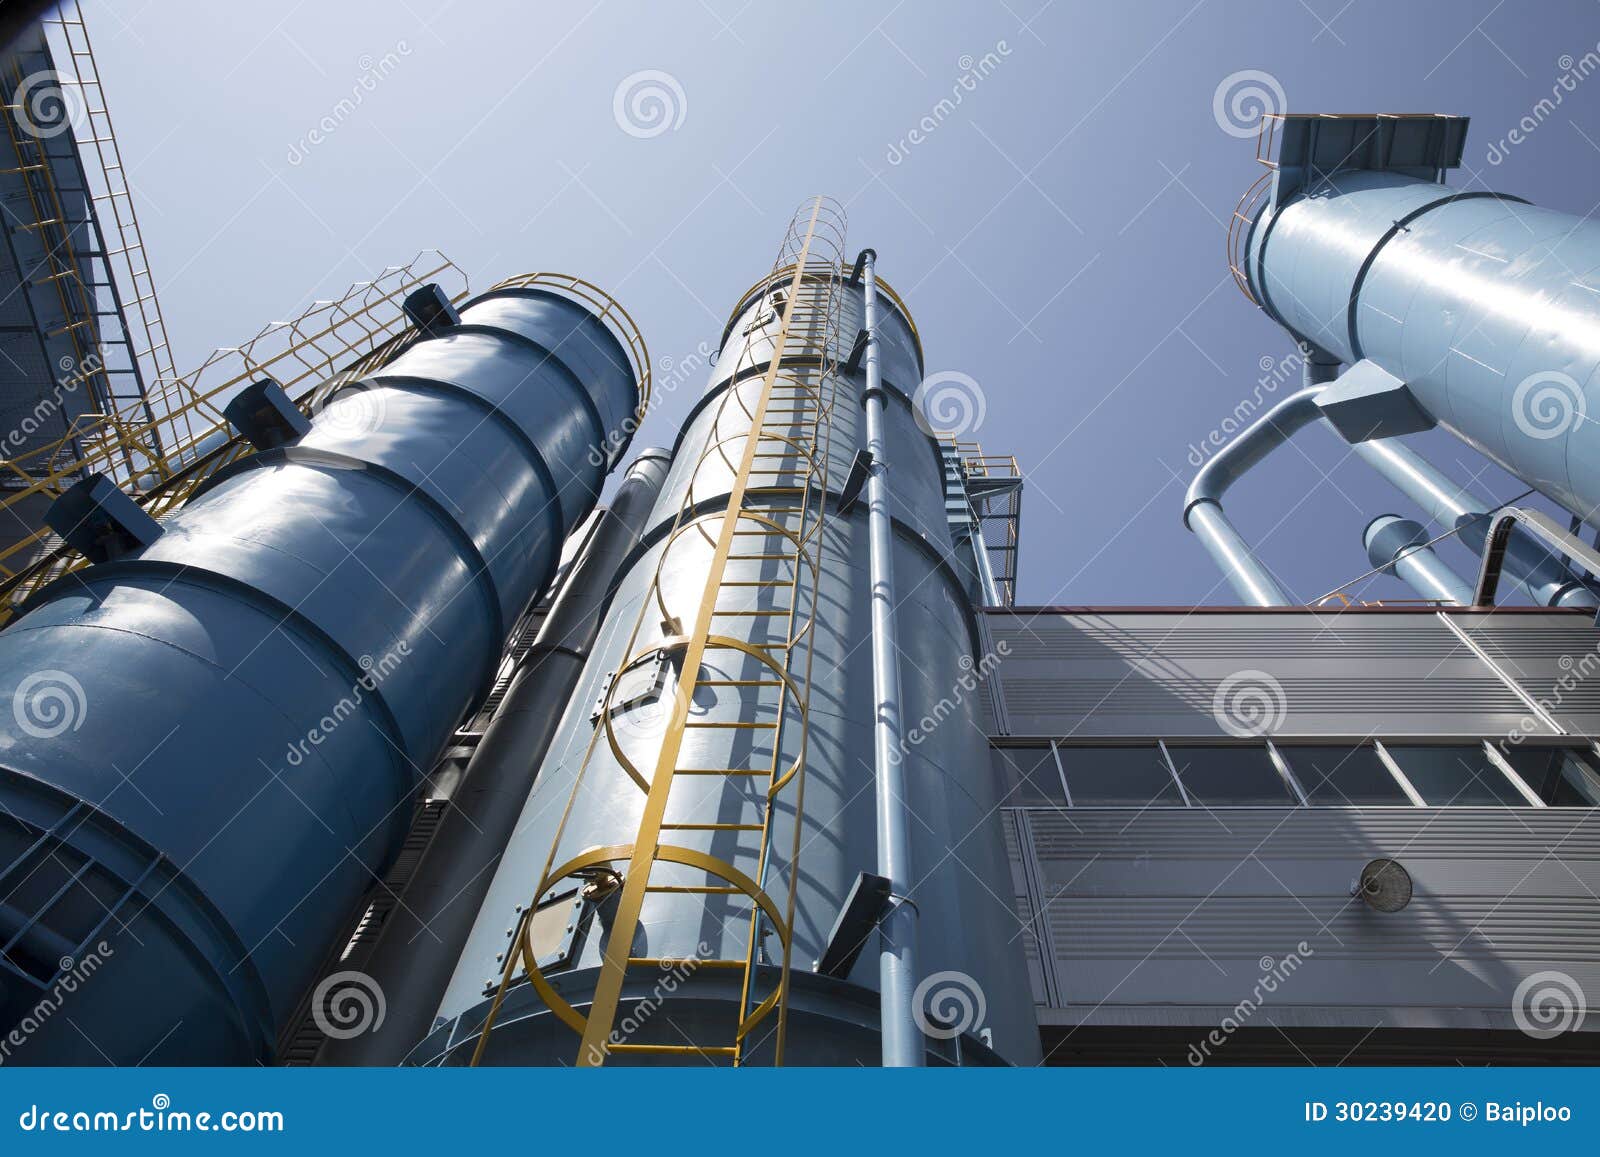 industrial building, the dust collector with clear blue sky background